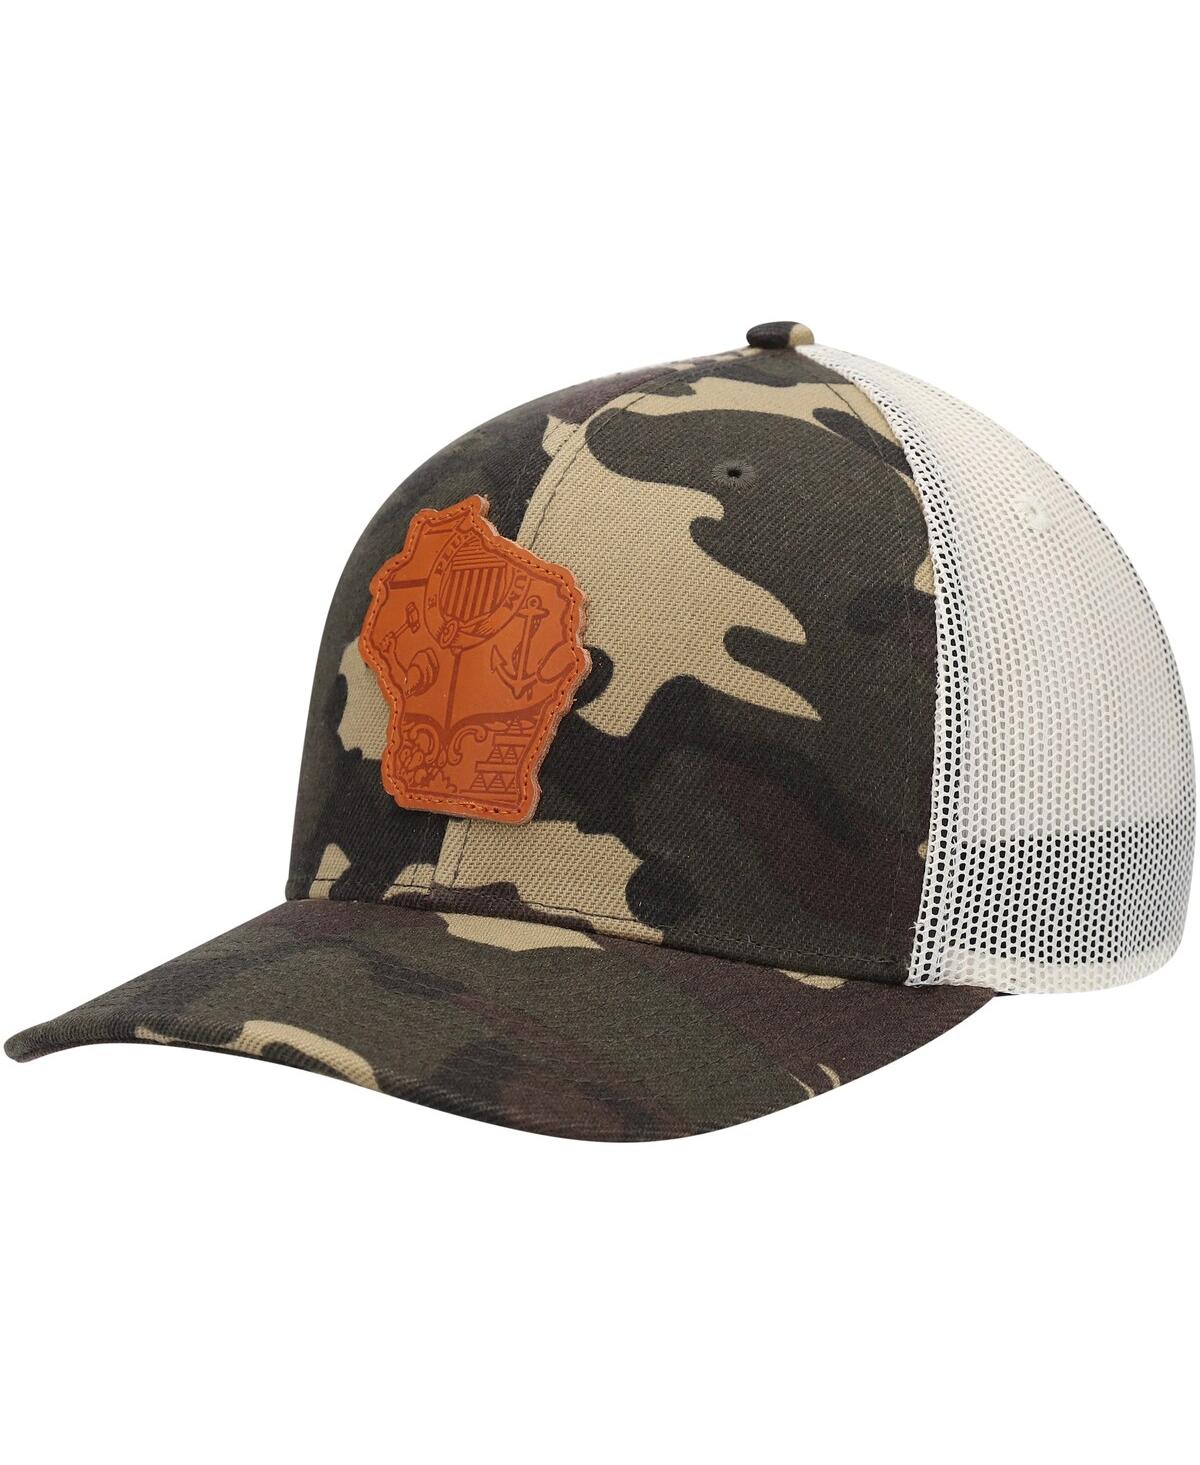 Men's Local Crowns Camo Wisconsin Icon Woodland State Patch Trucker Snapback Hat - Camo